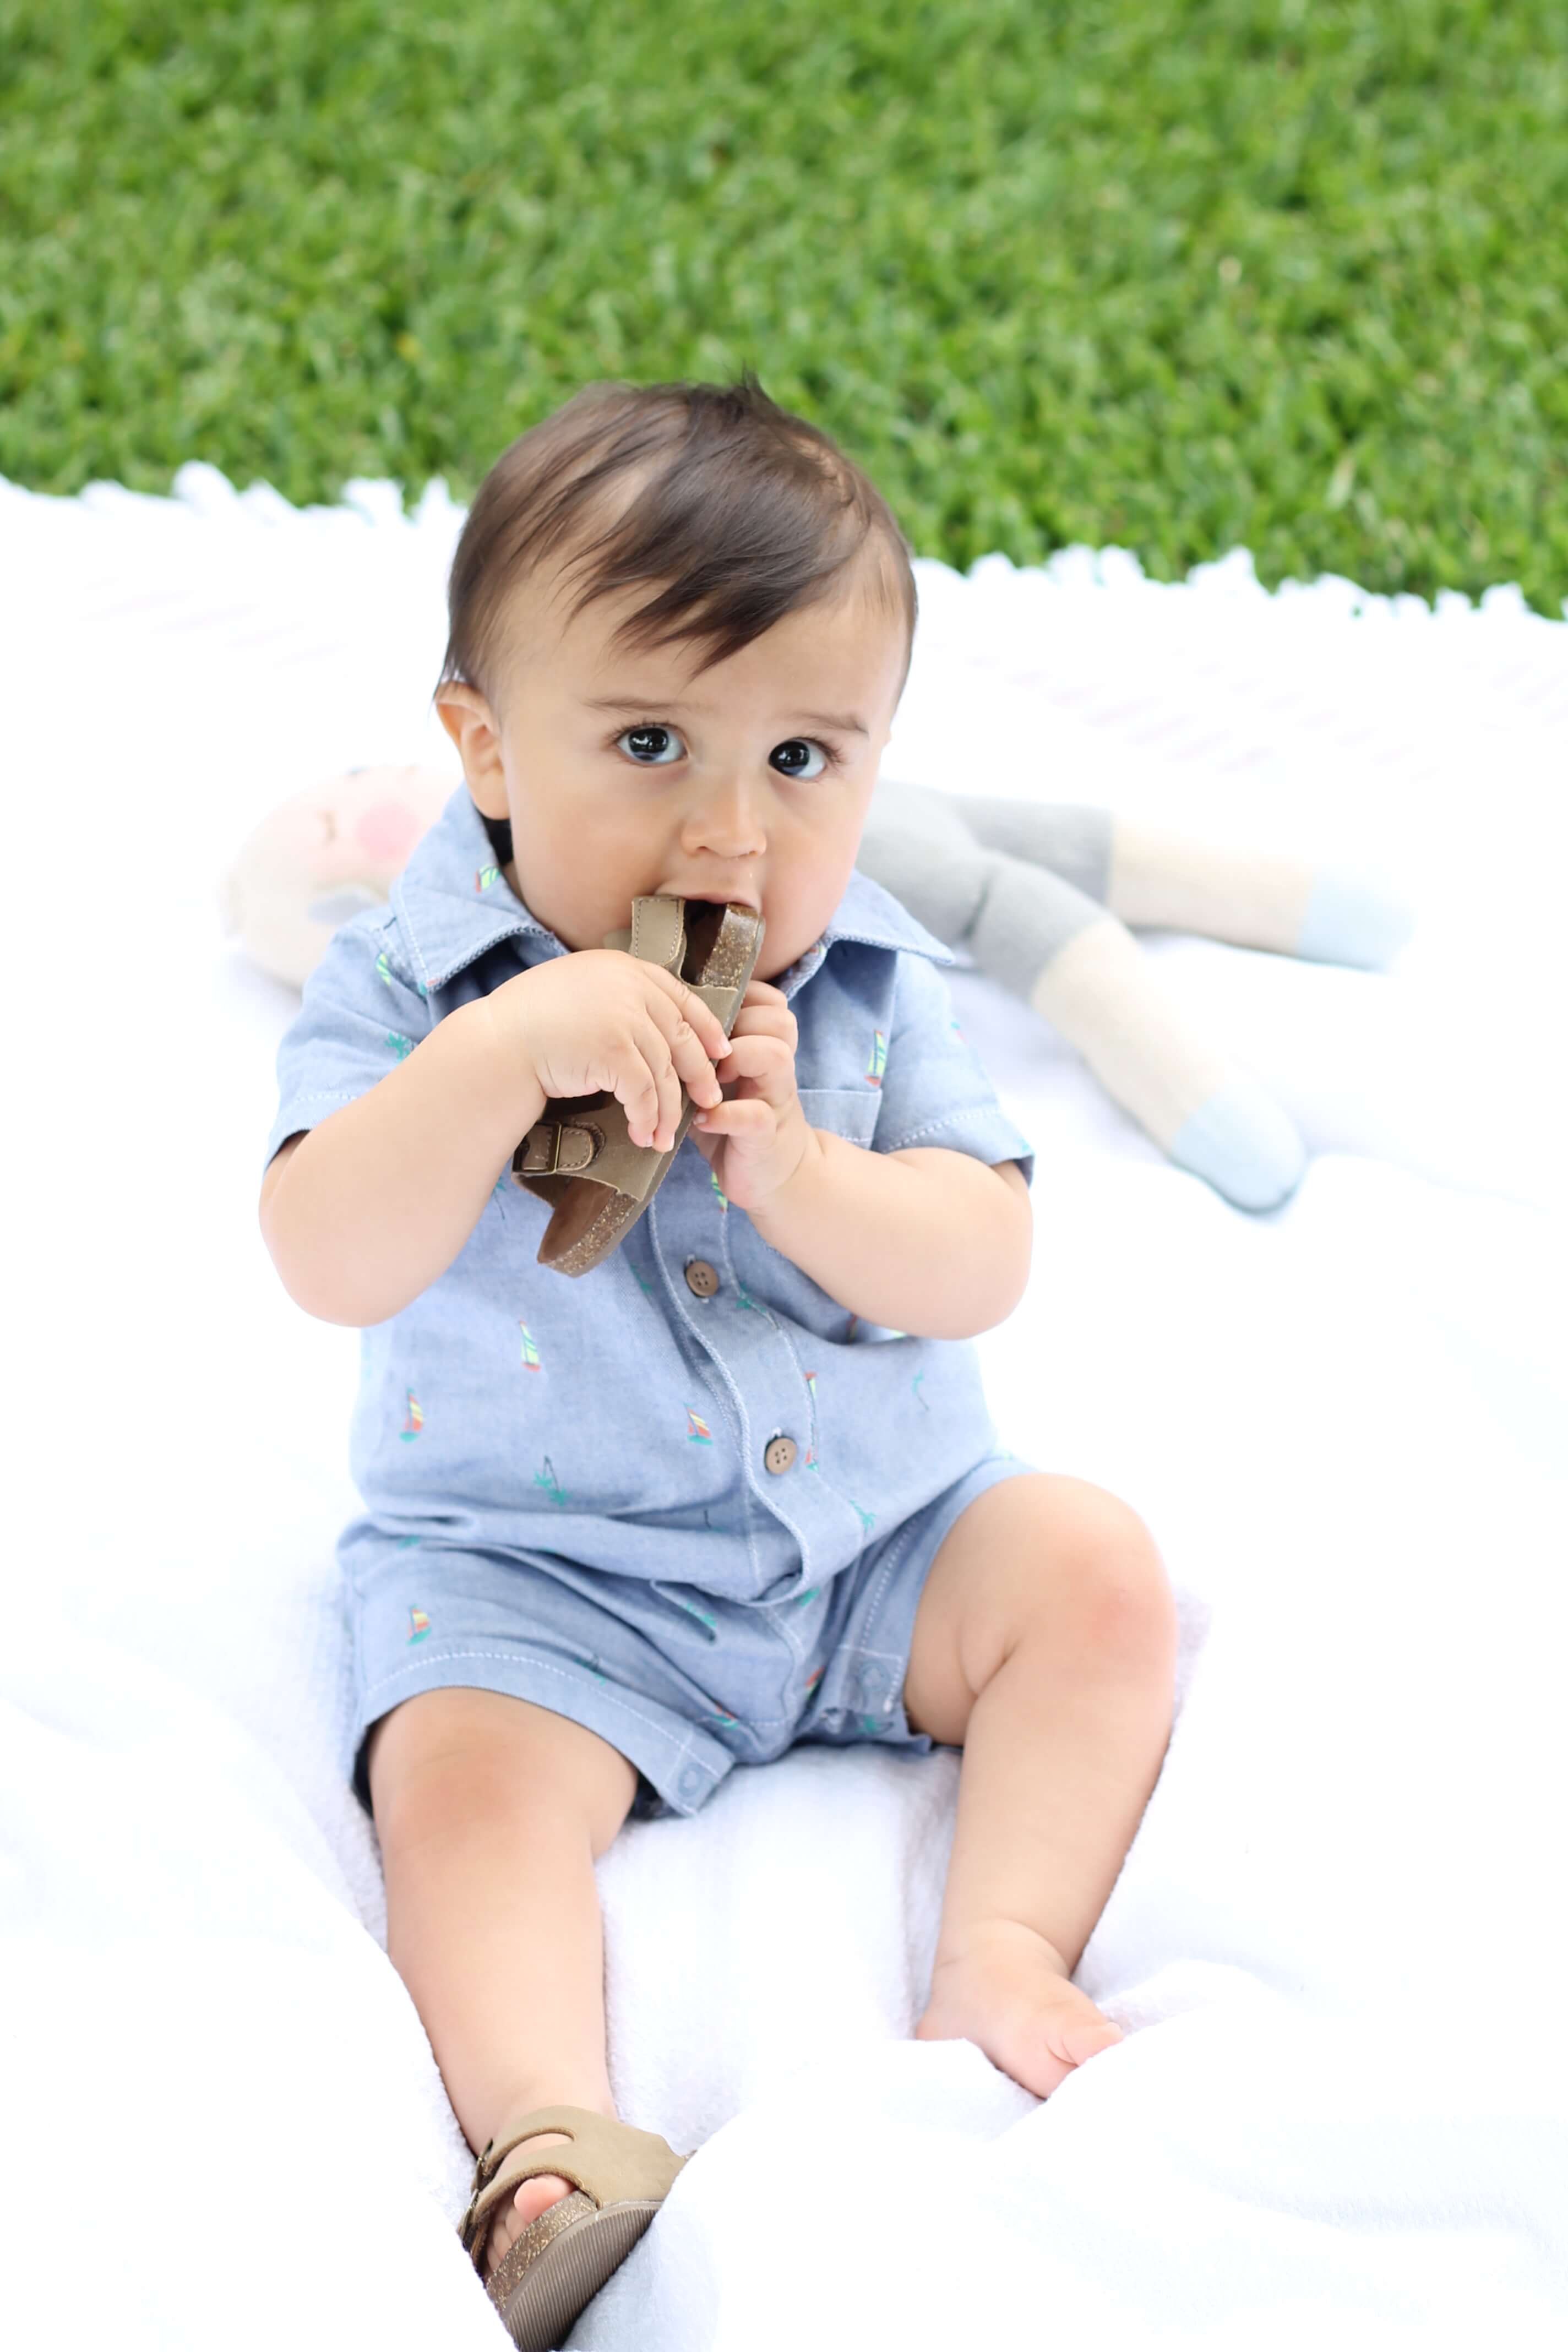 The ultimate guide to baby clothes for your baby's first year. What you really need and how much. #lovecarters (AD)